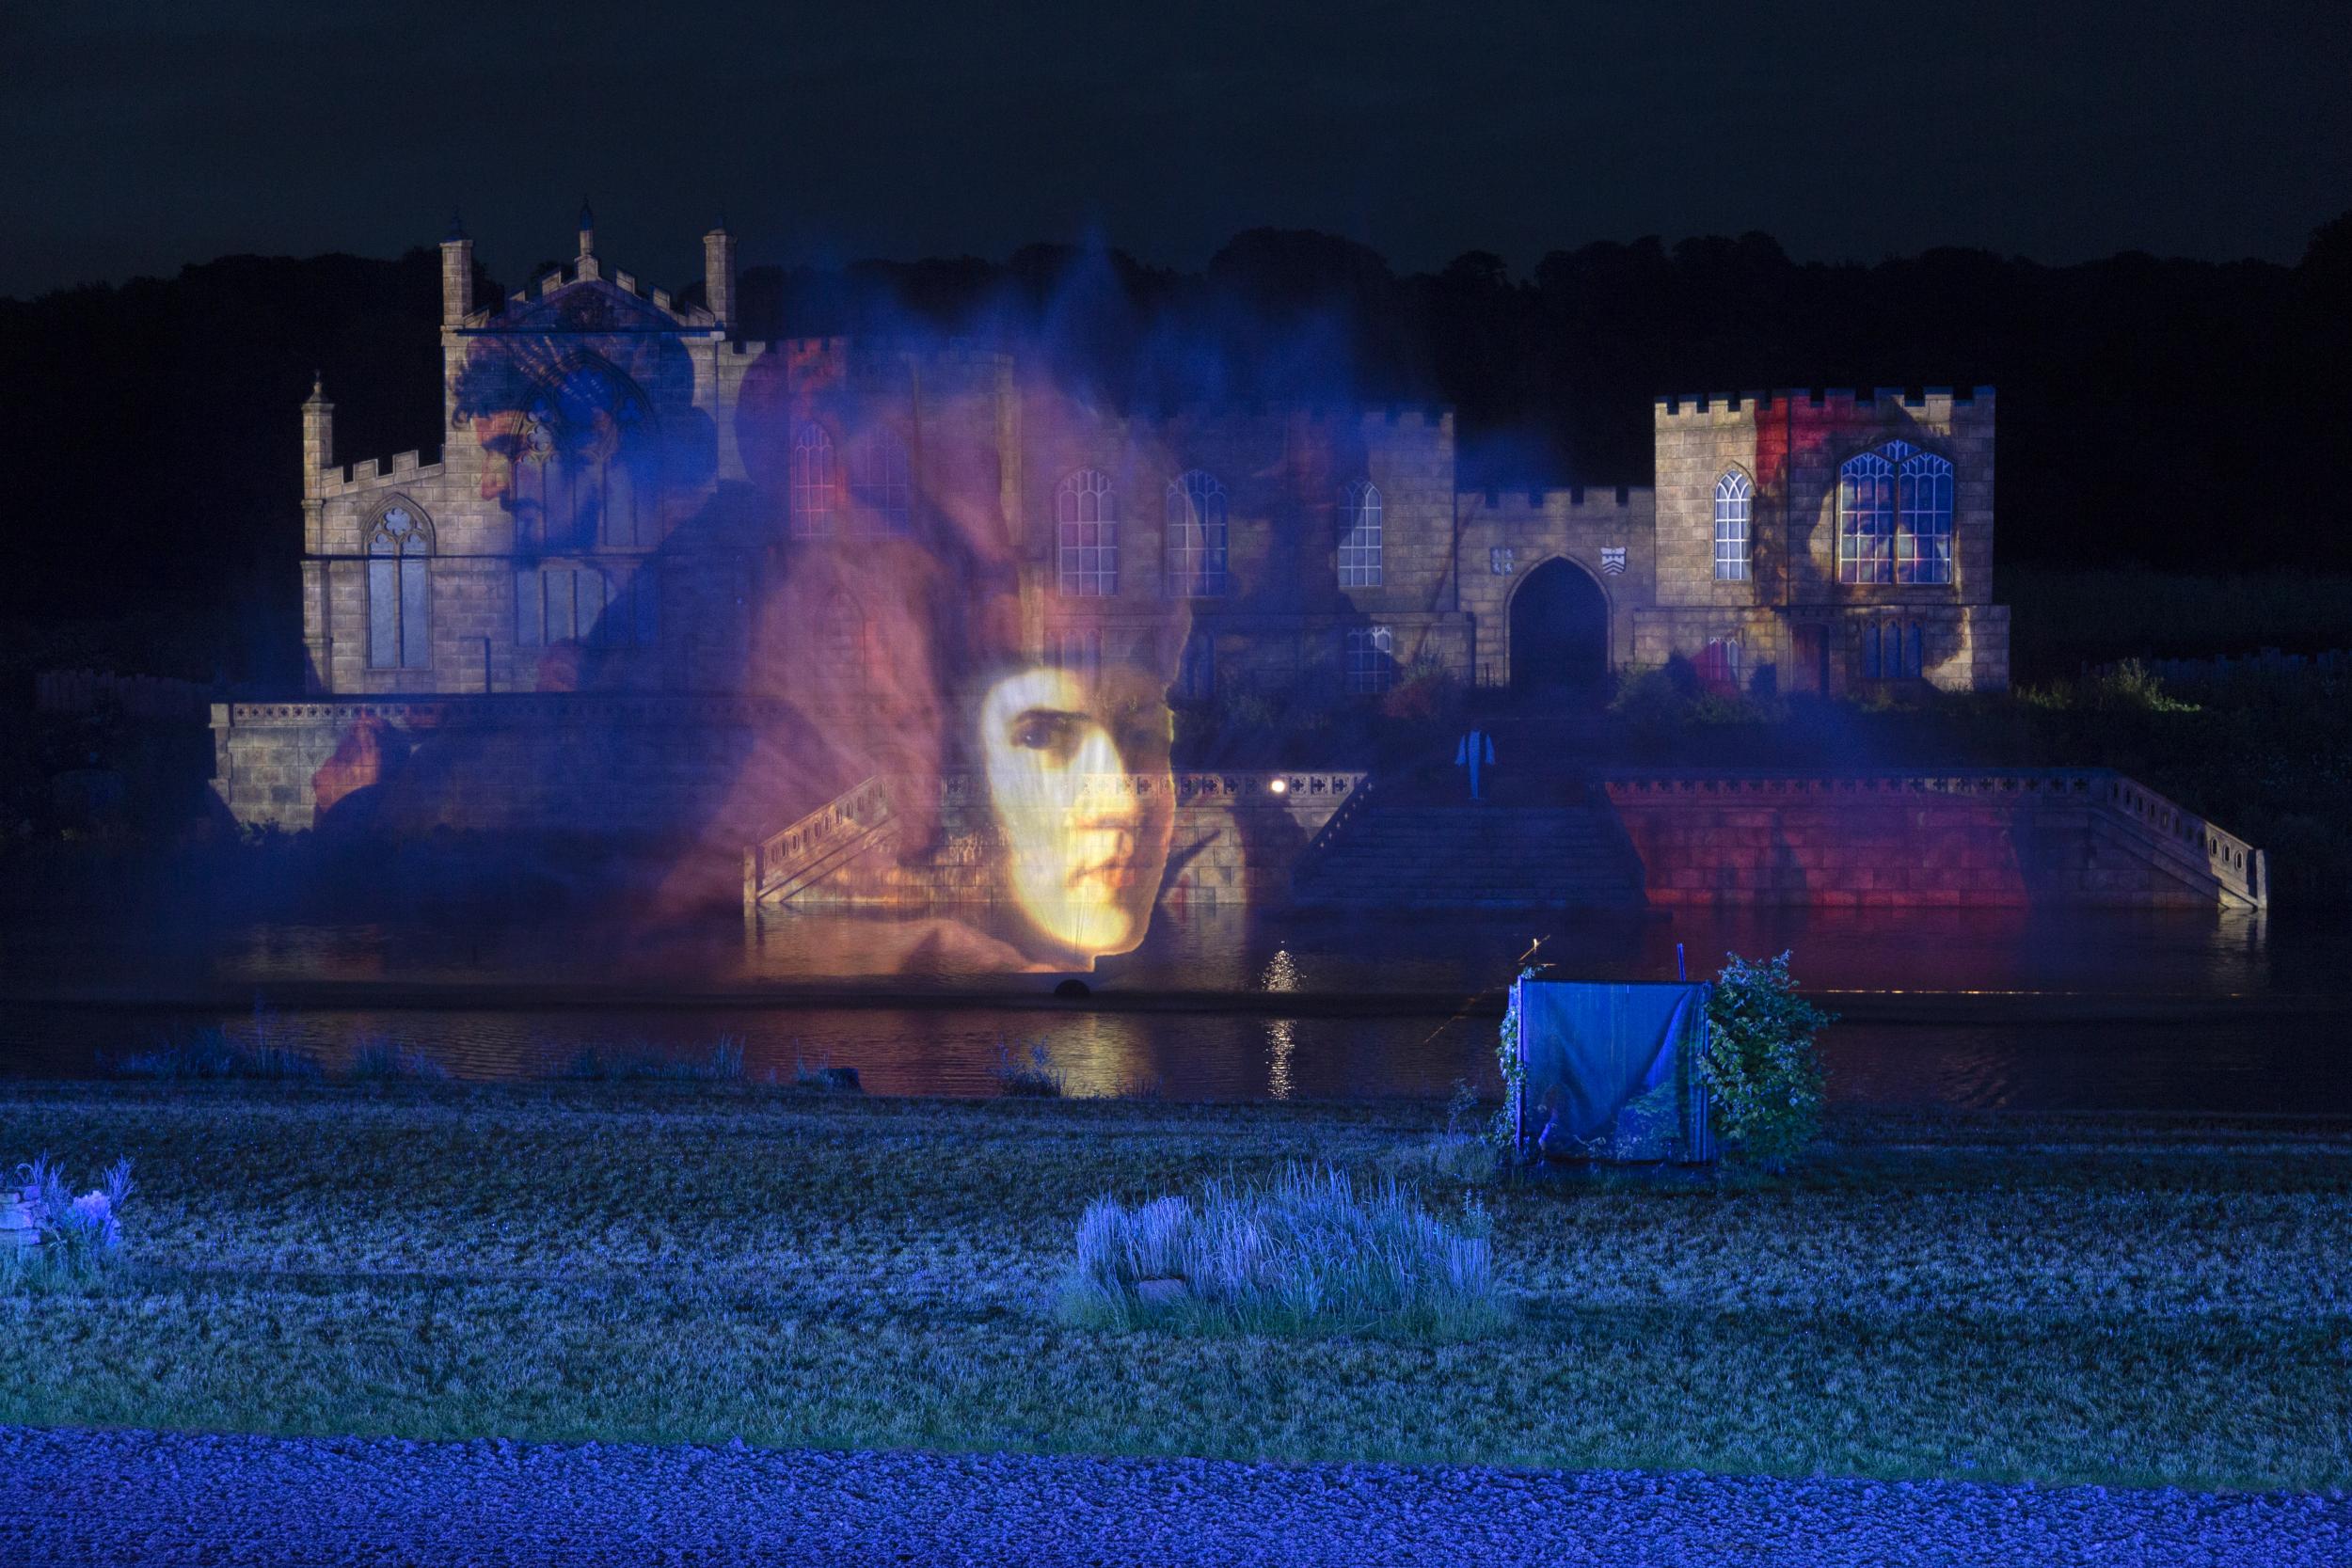 Living history: Kynren is an epic performance that brings together the whole community